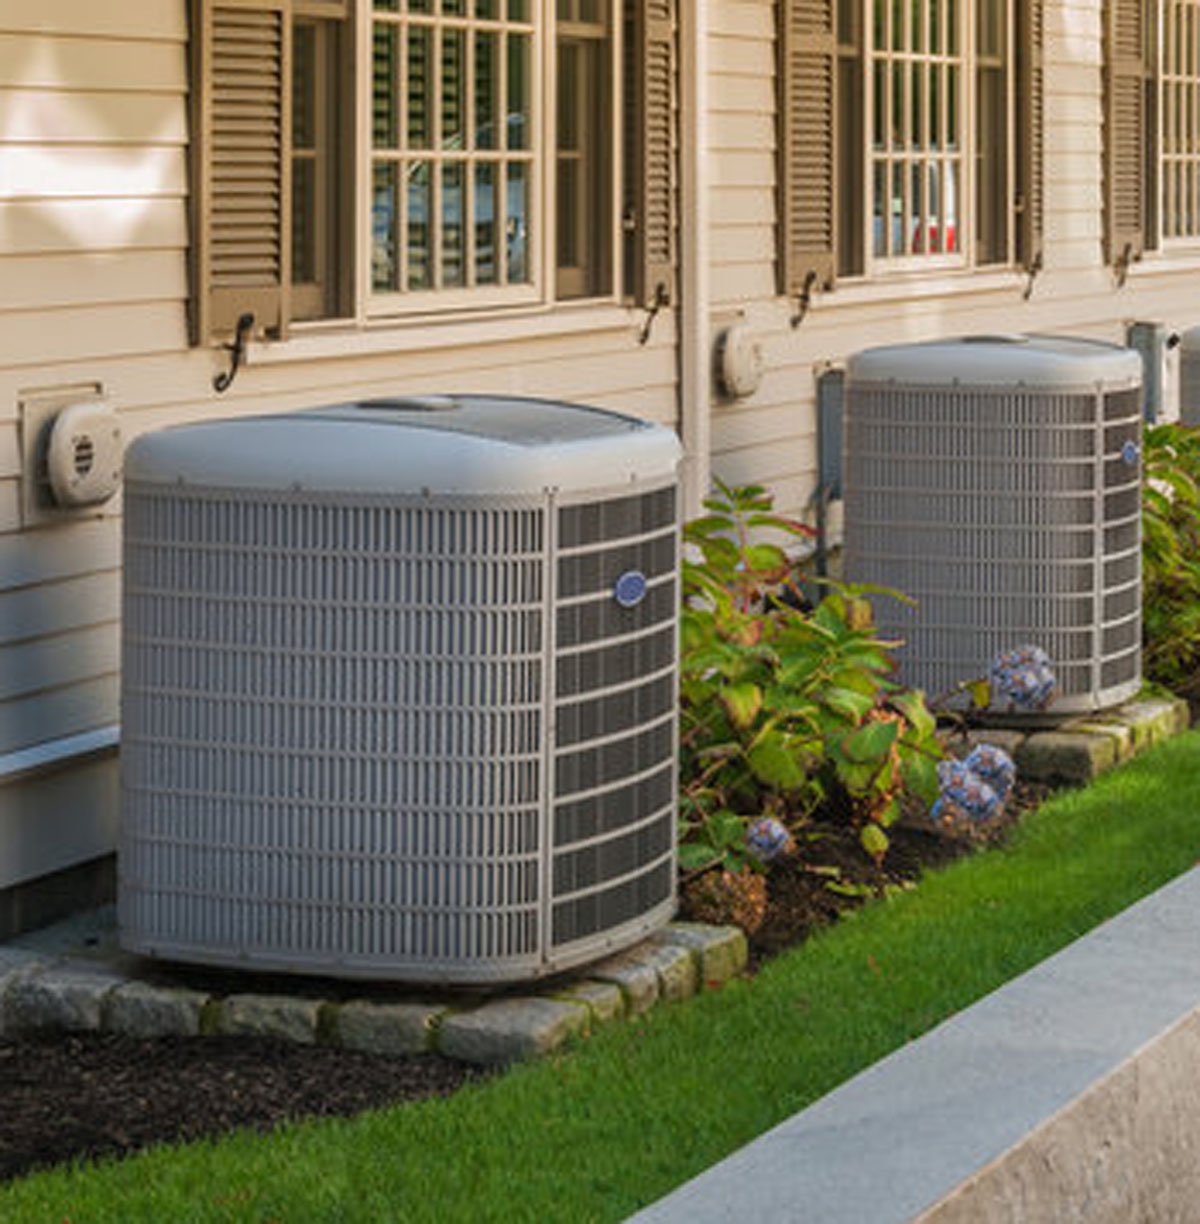 Mount Dora Air Conditioning and Duct Services & Repair